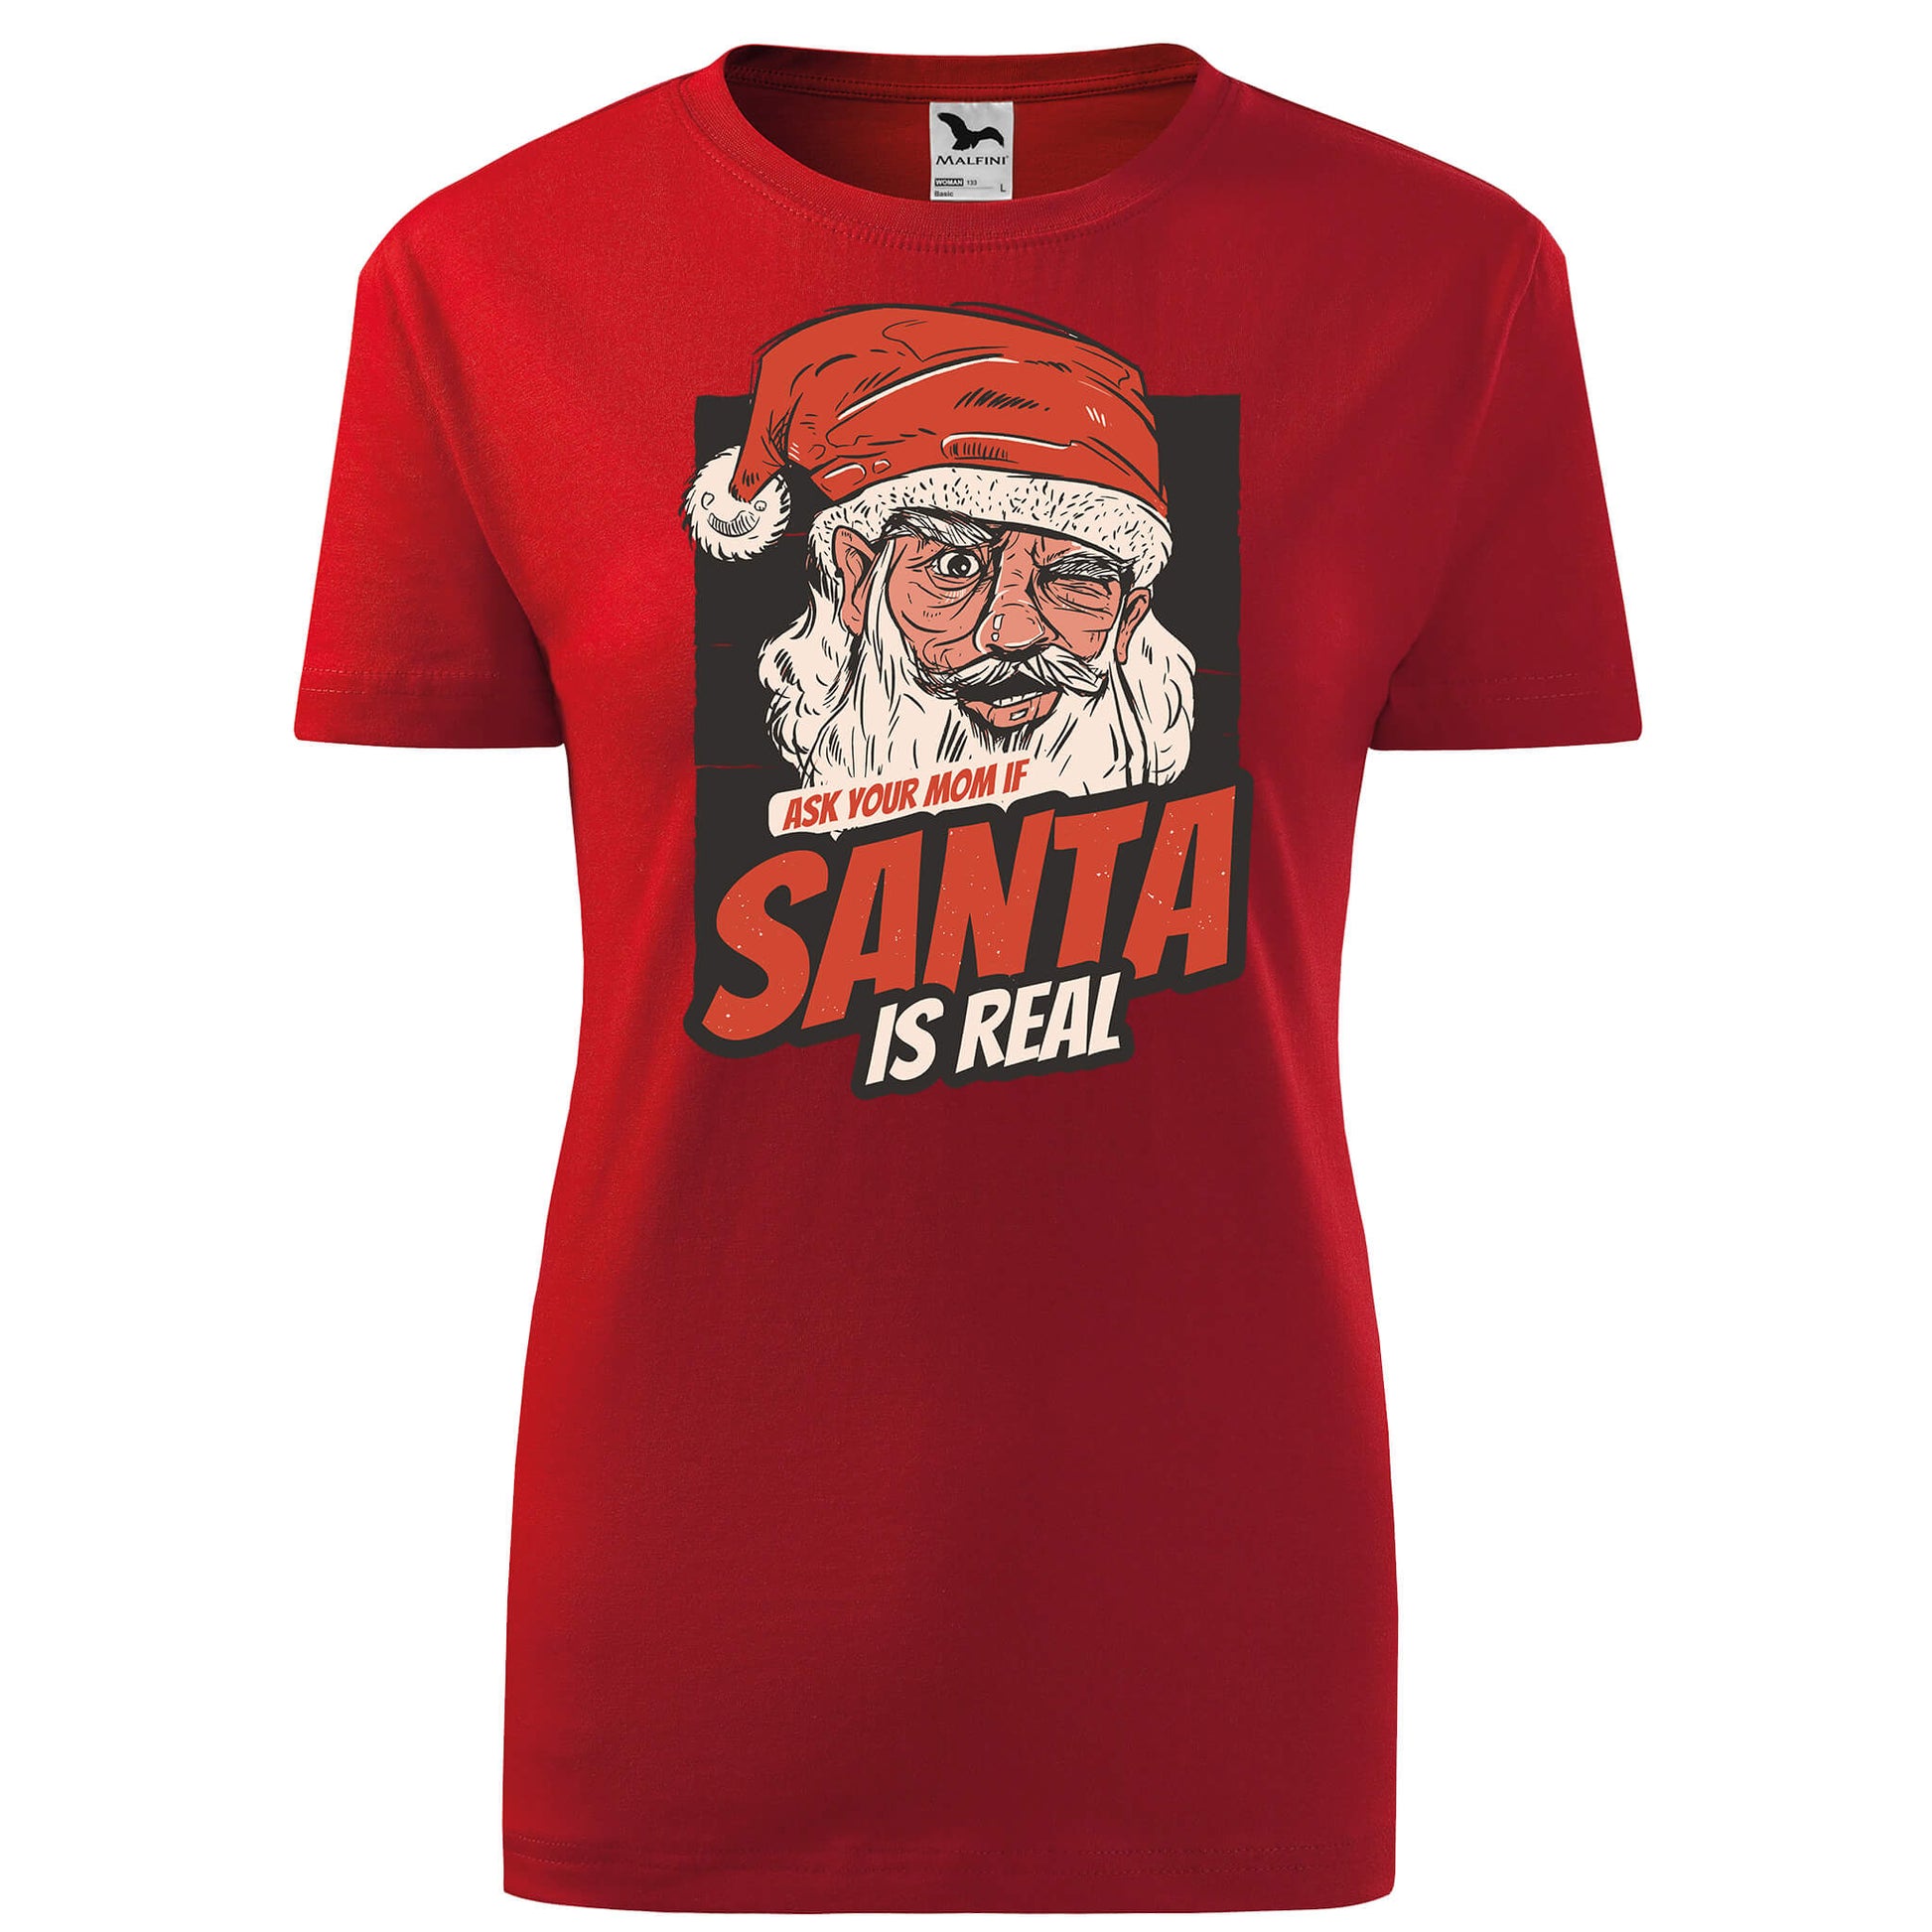 Ask your mom if santa is real t-shirt - rvdesignprint